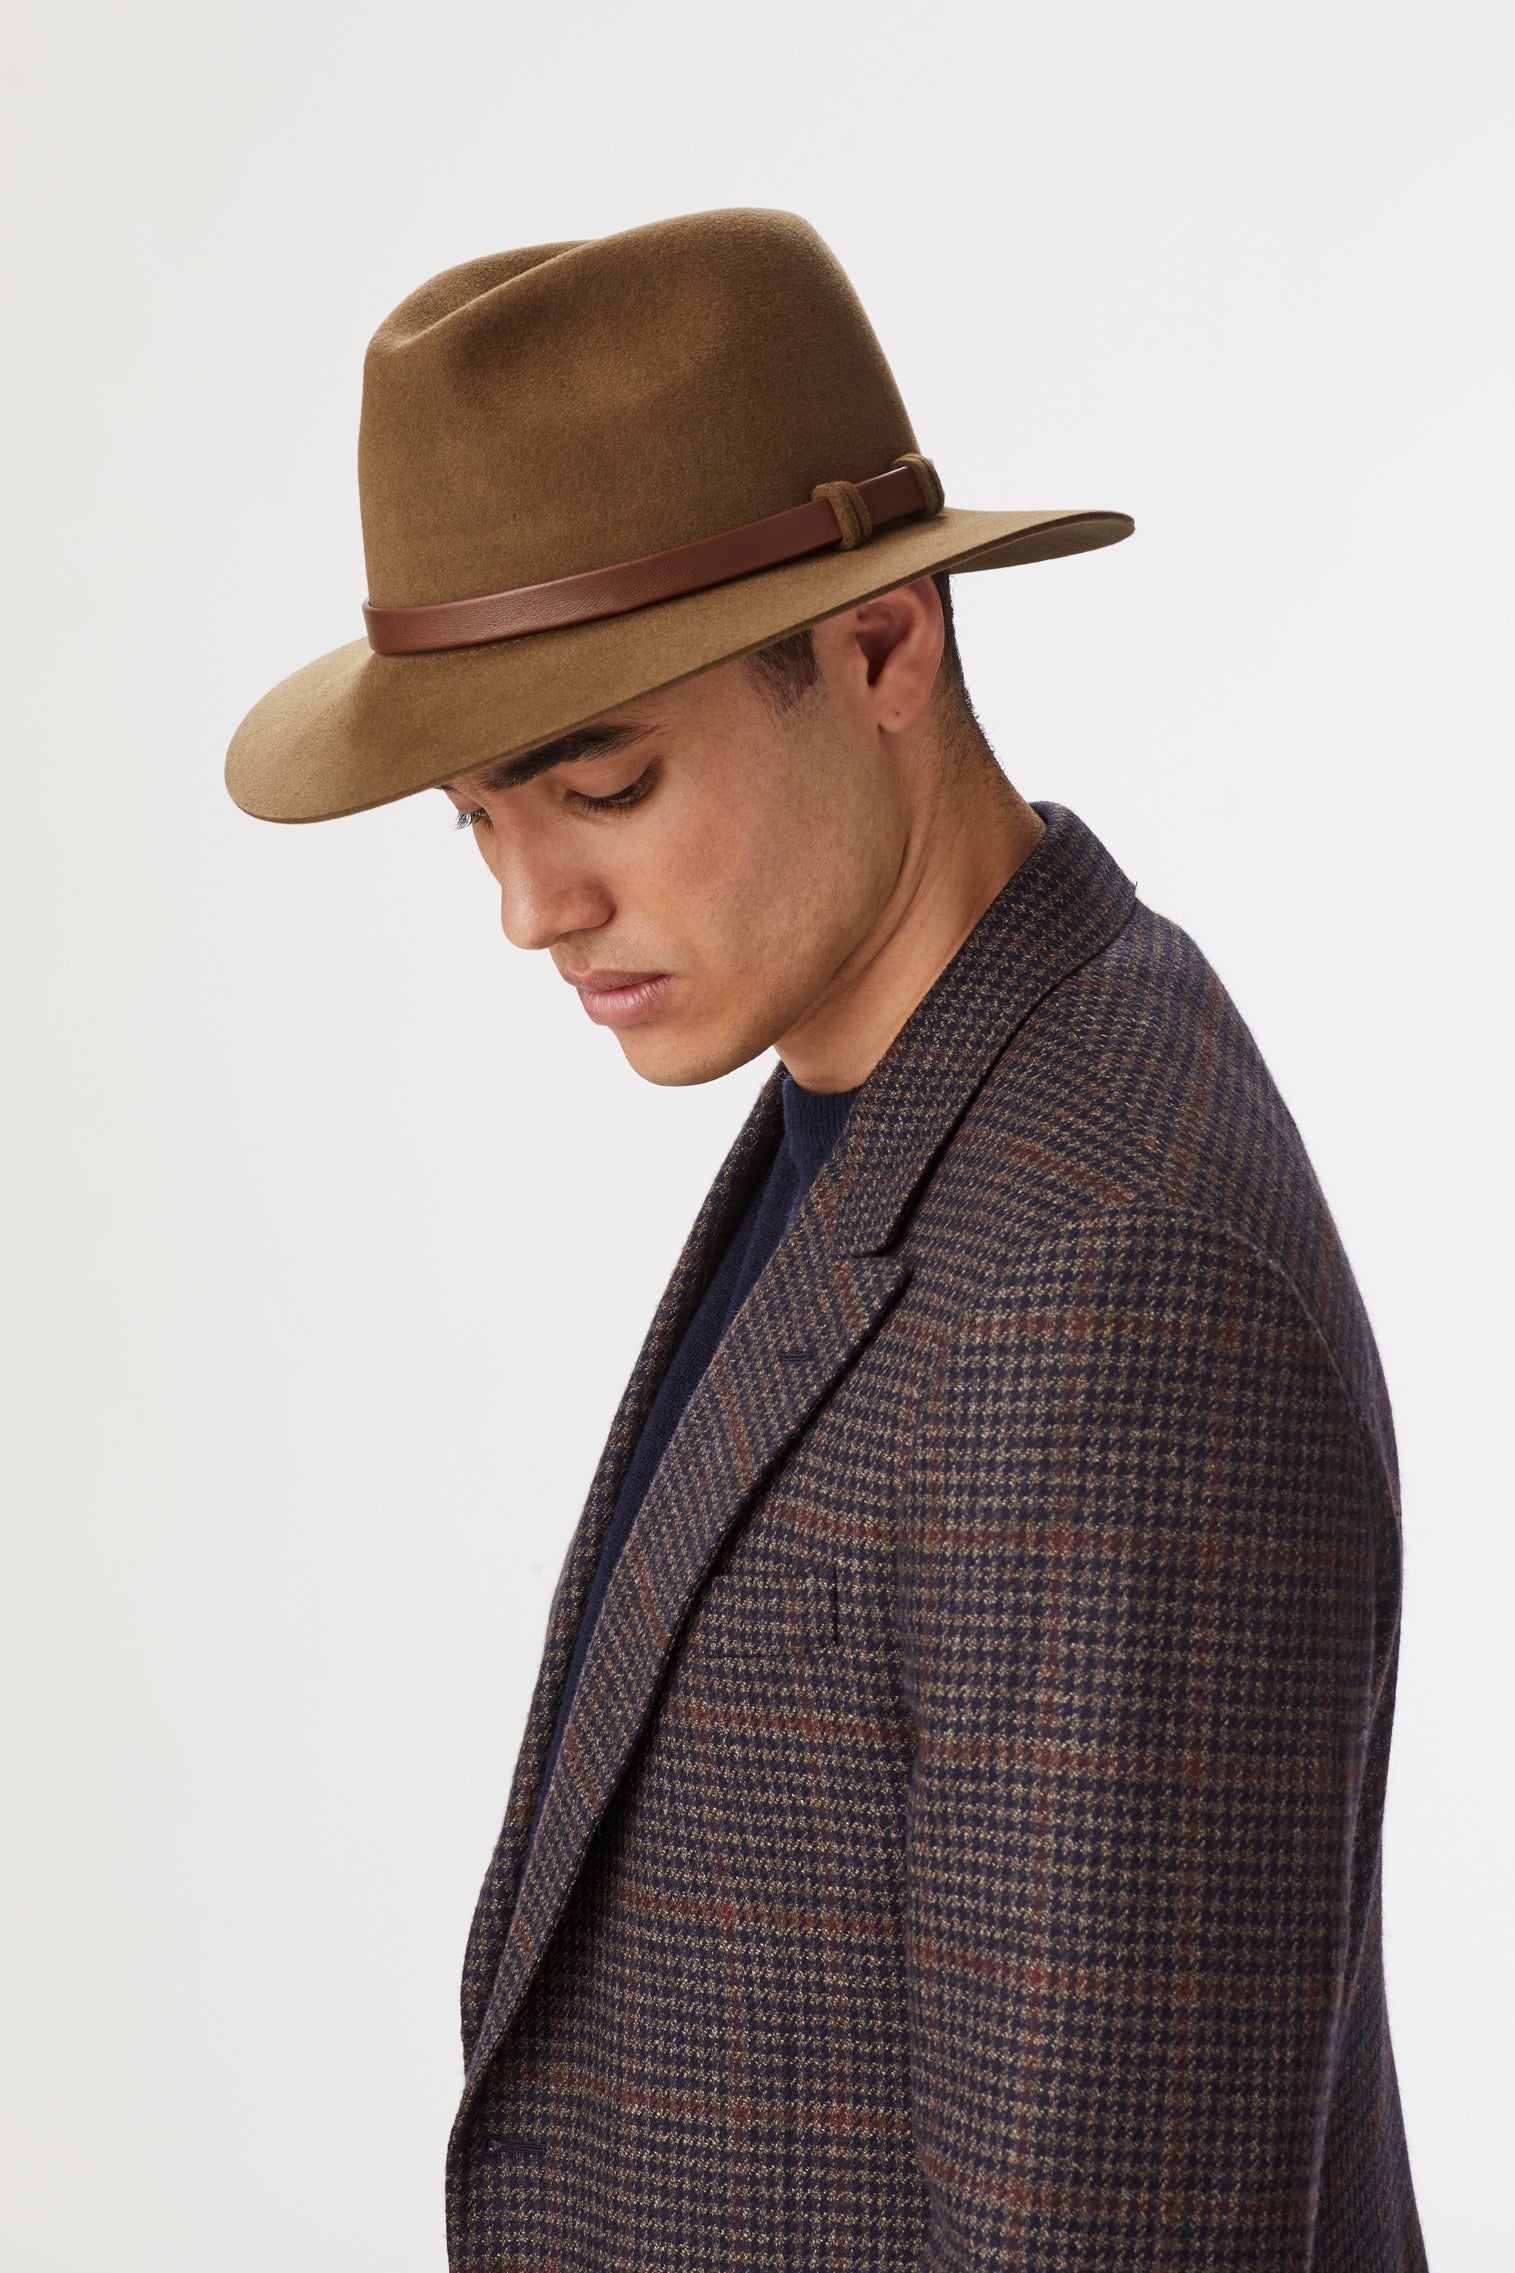 Chepstow Trilby - Hats for Tall People - Lock & Co. Hatters London UK